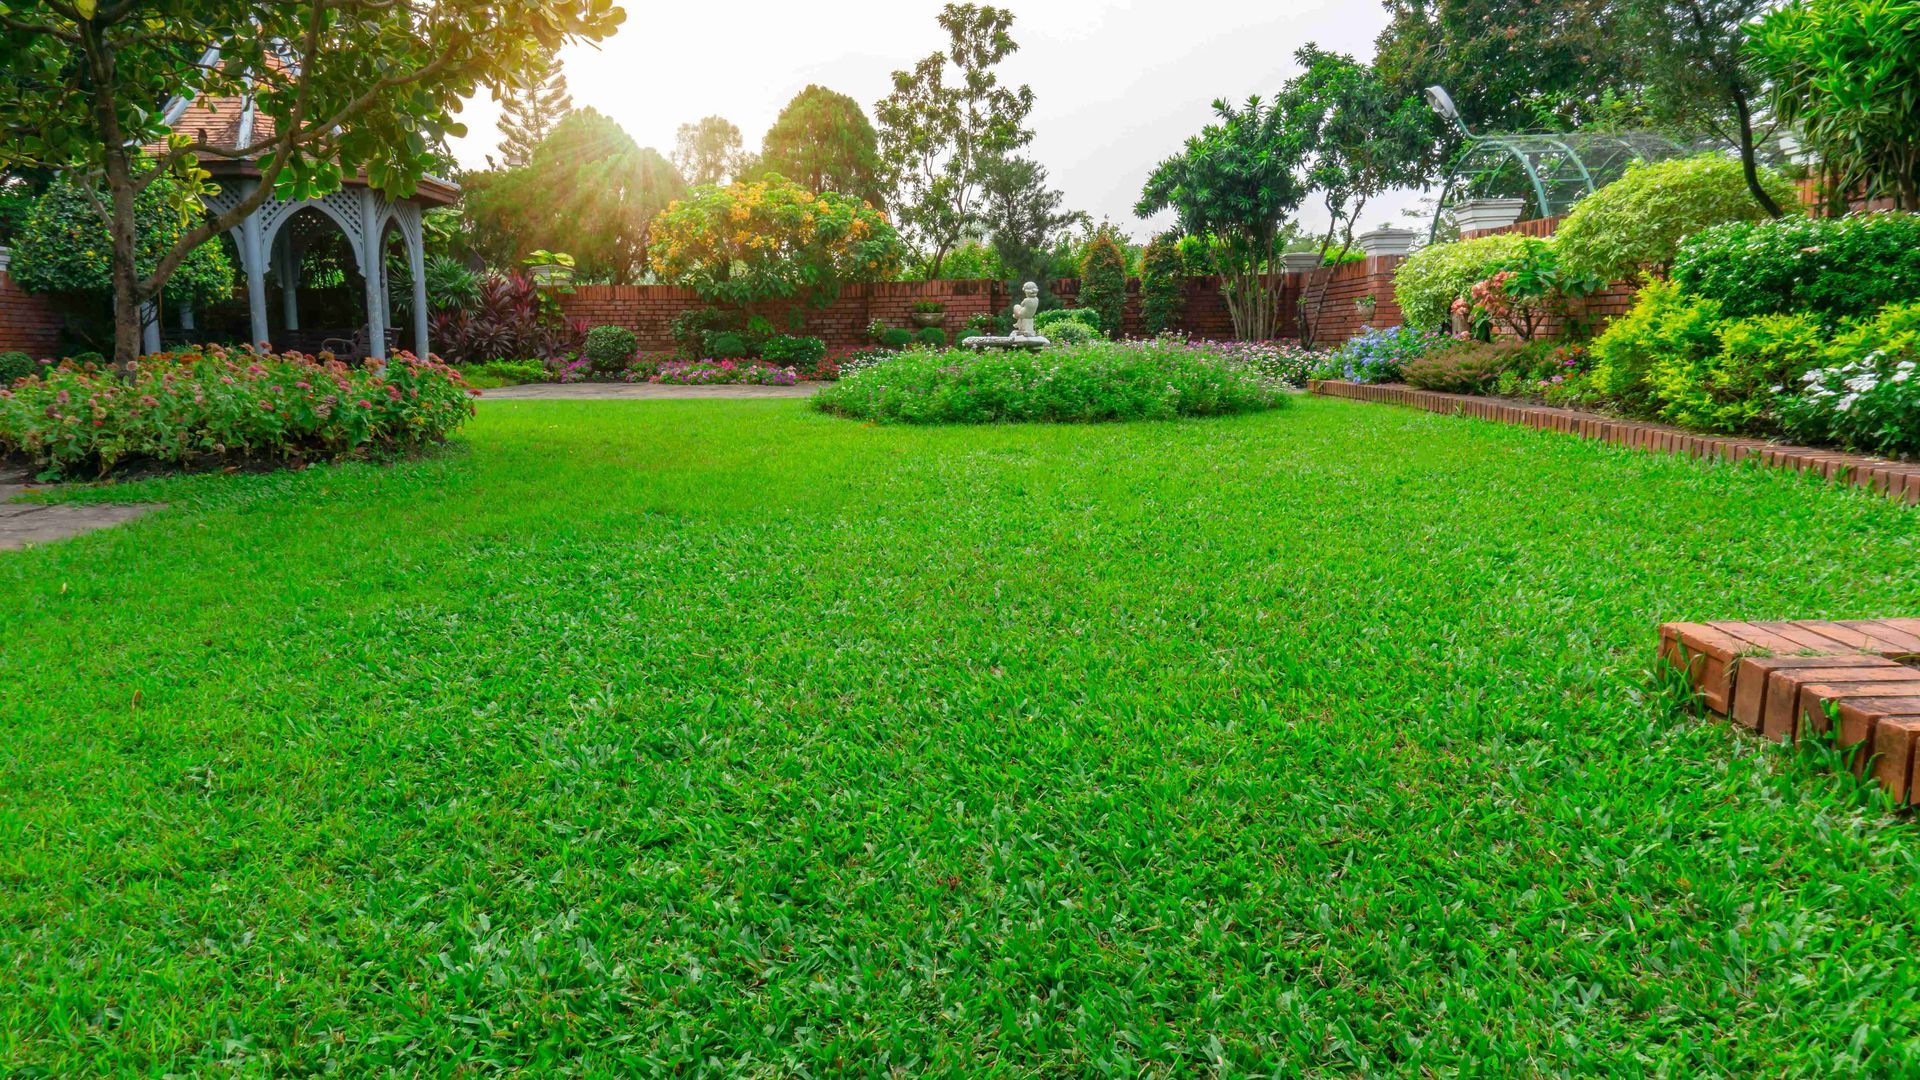 A new, clean, landscaped yard